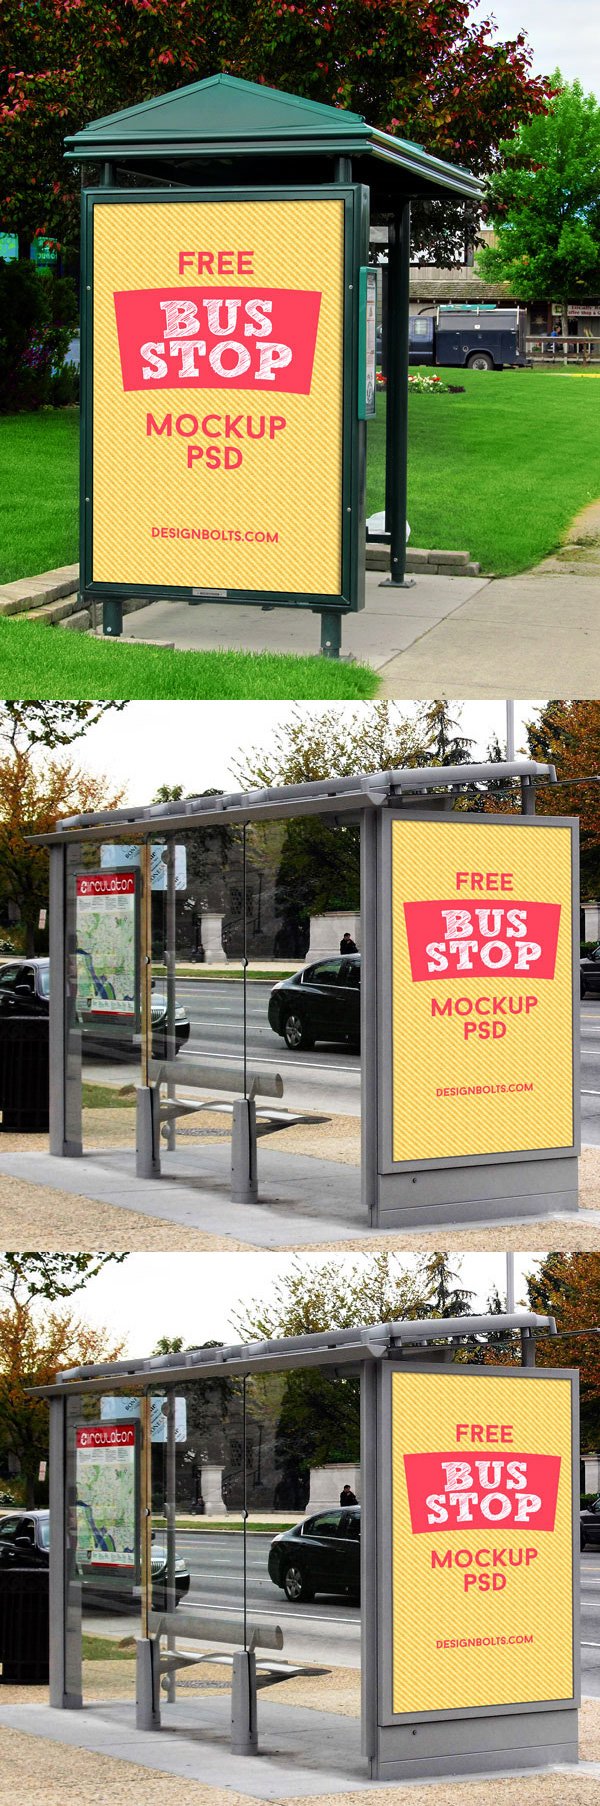 3 Free HQ Outdoor Advertising Bus Stop Mockup